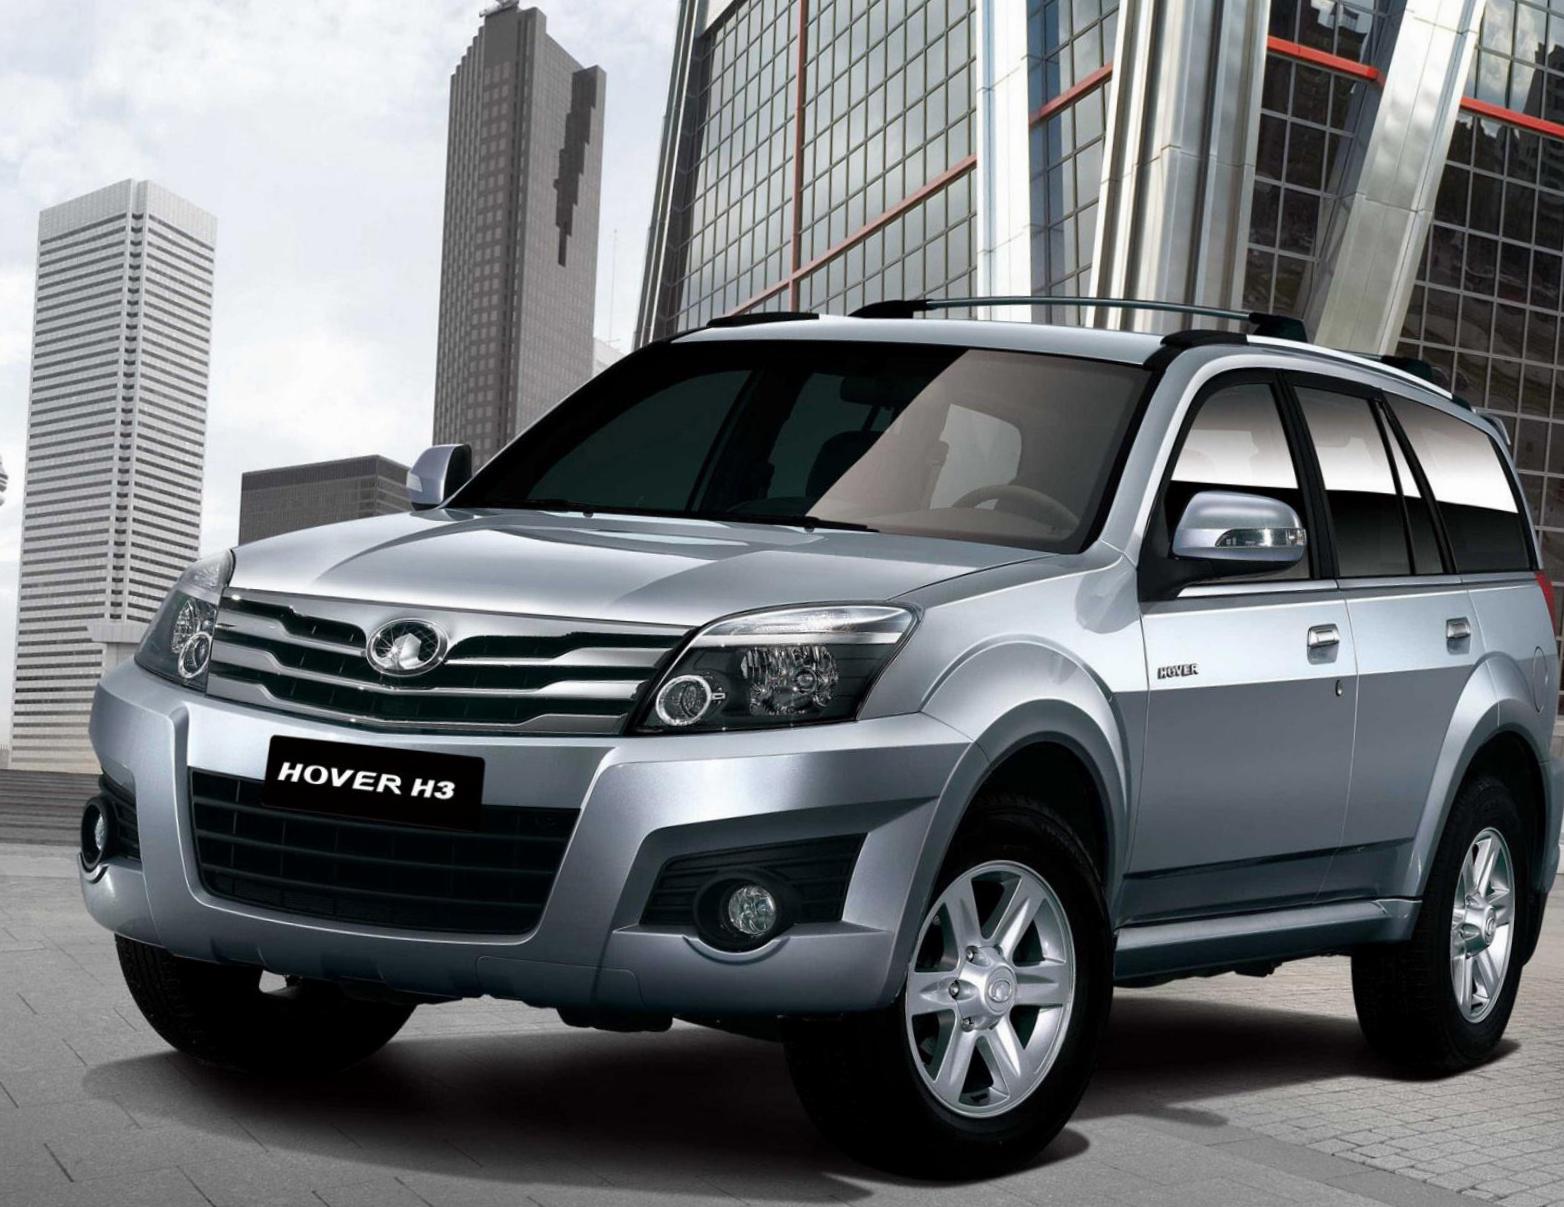 Haval H3 Great Wall approved 2013